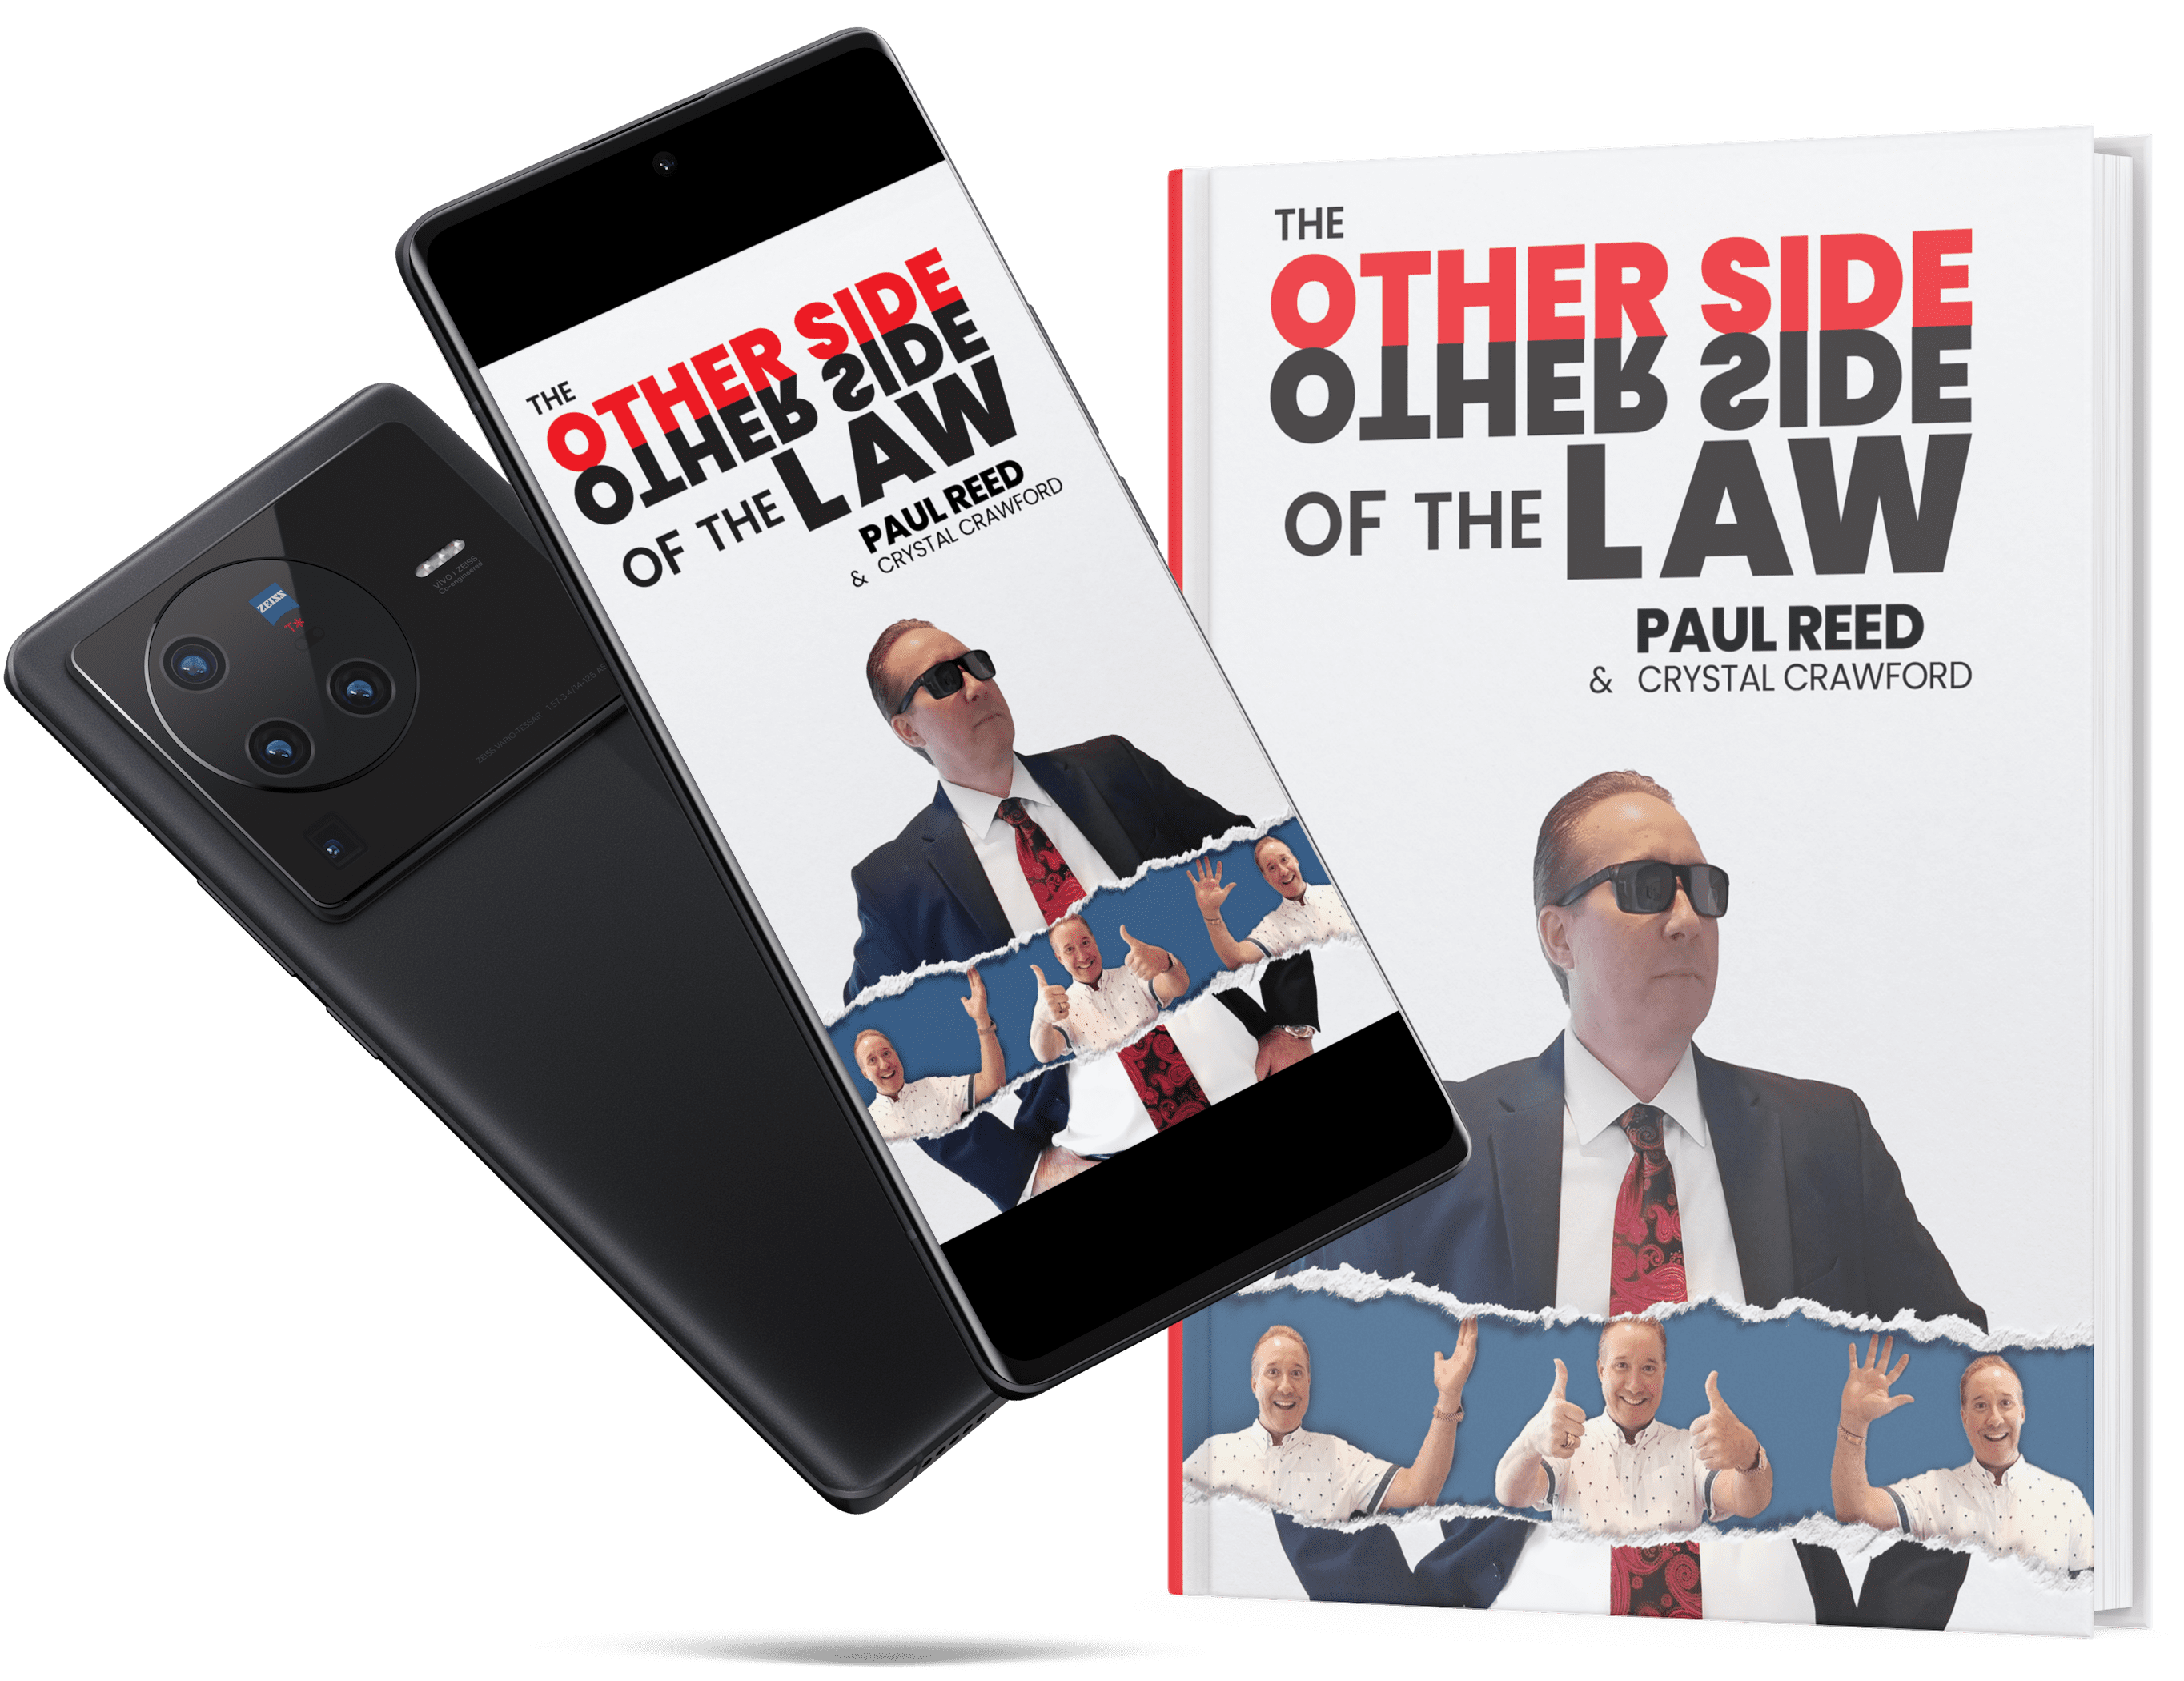 The Other Side of the Law Book Cover and Mobile Book